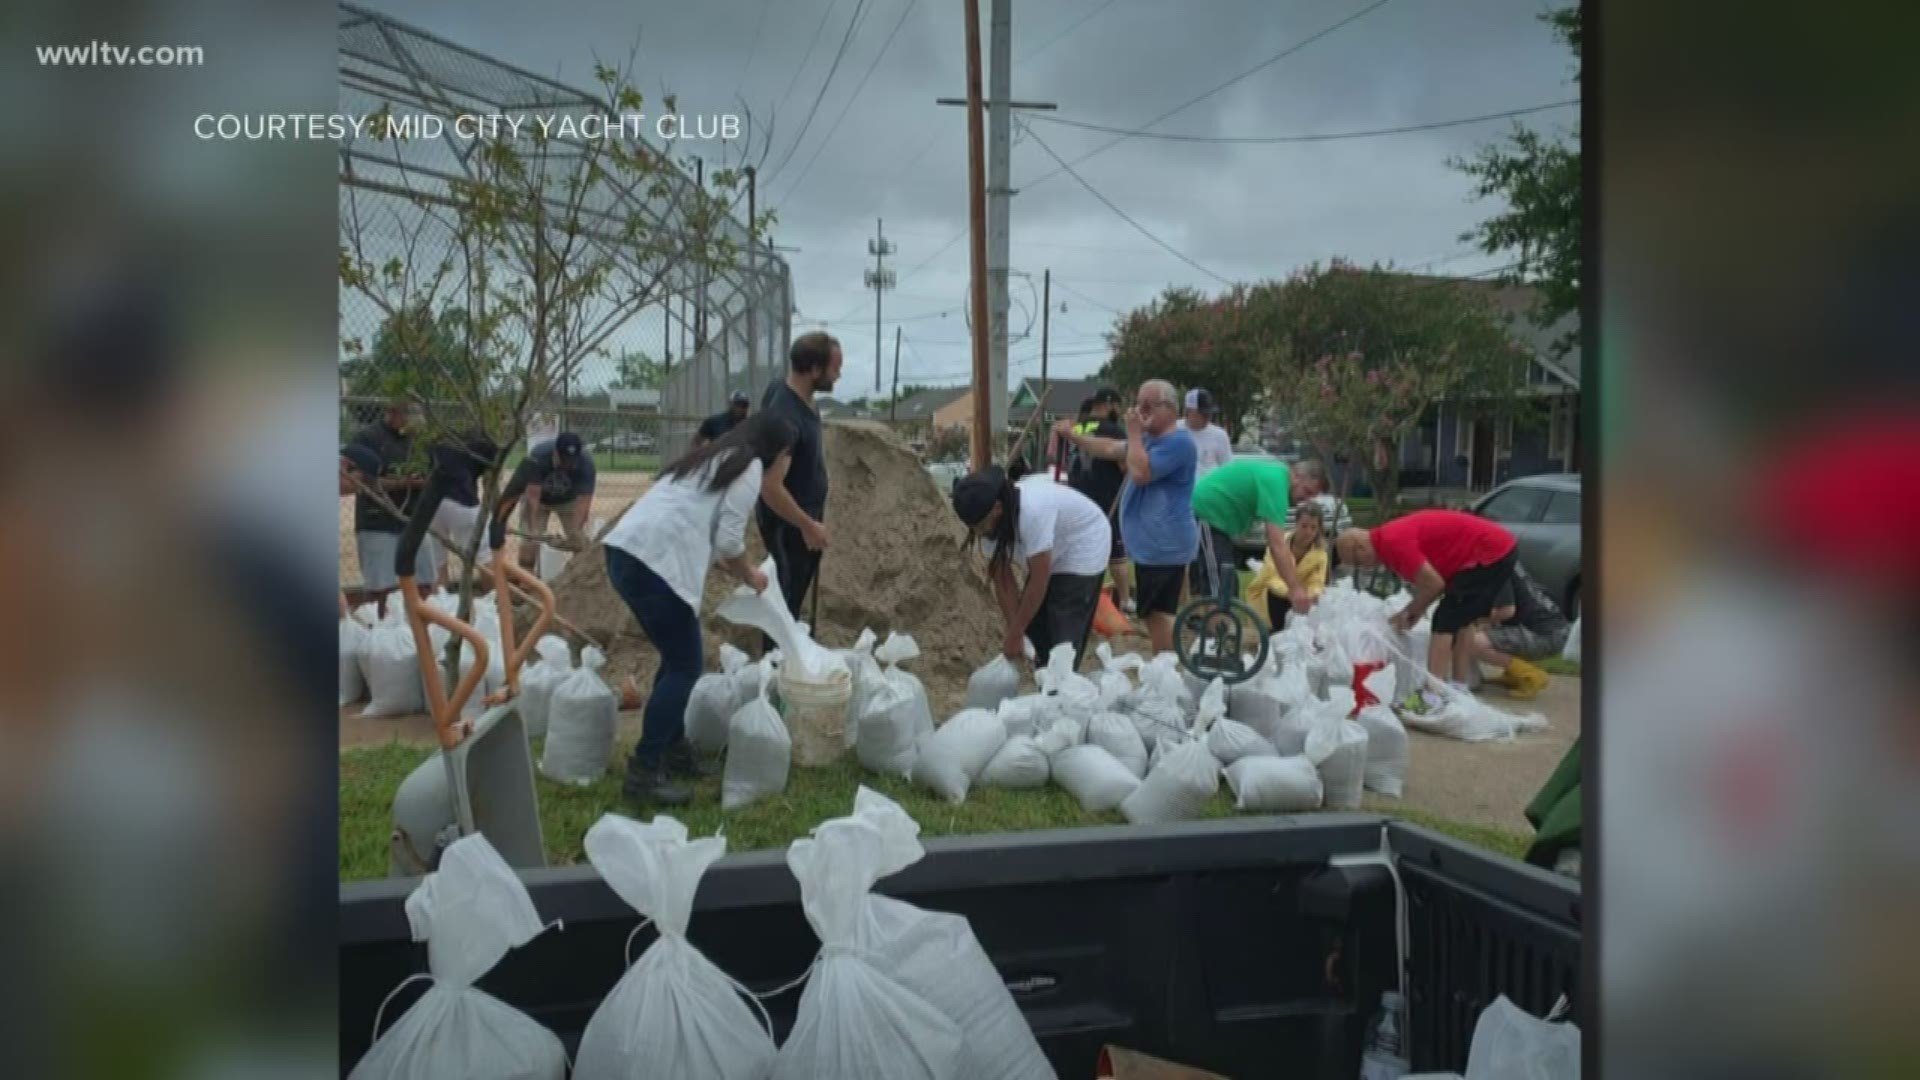 About 1,100 sandbags were filled with the help of the Mid City Yacht Club, but some neighbors had to get creative ahead of the storm.